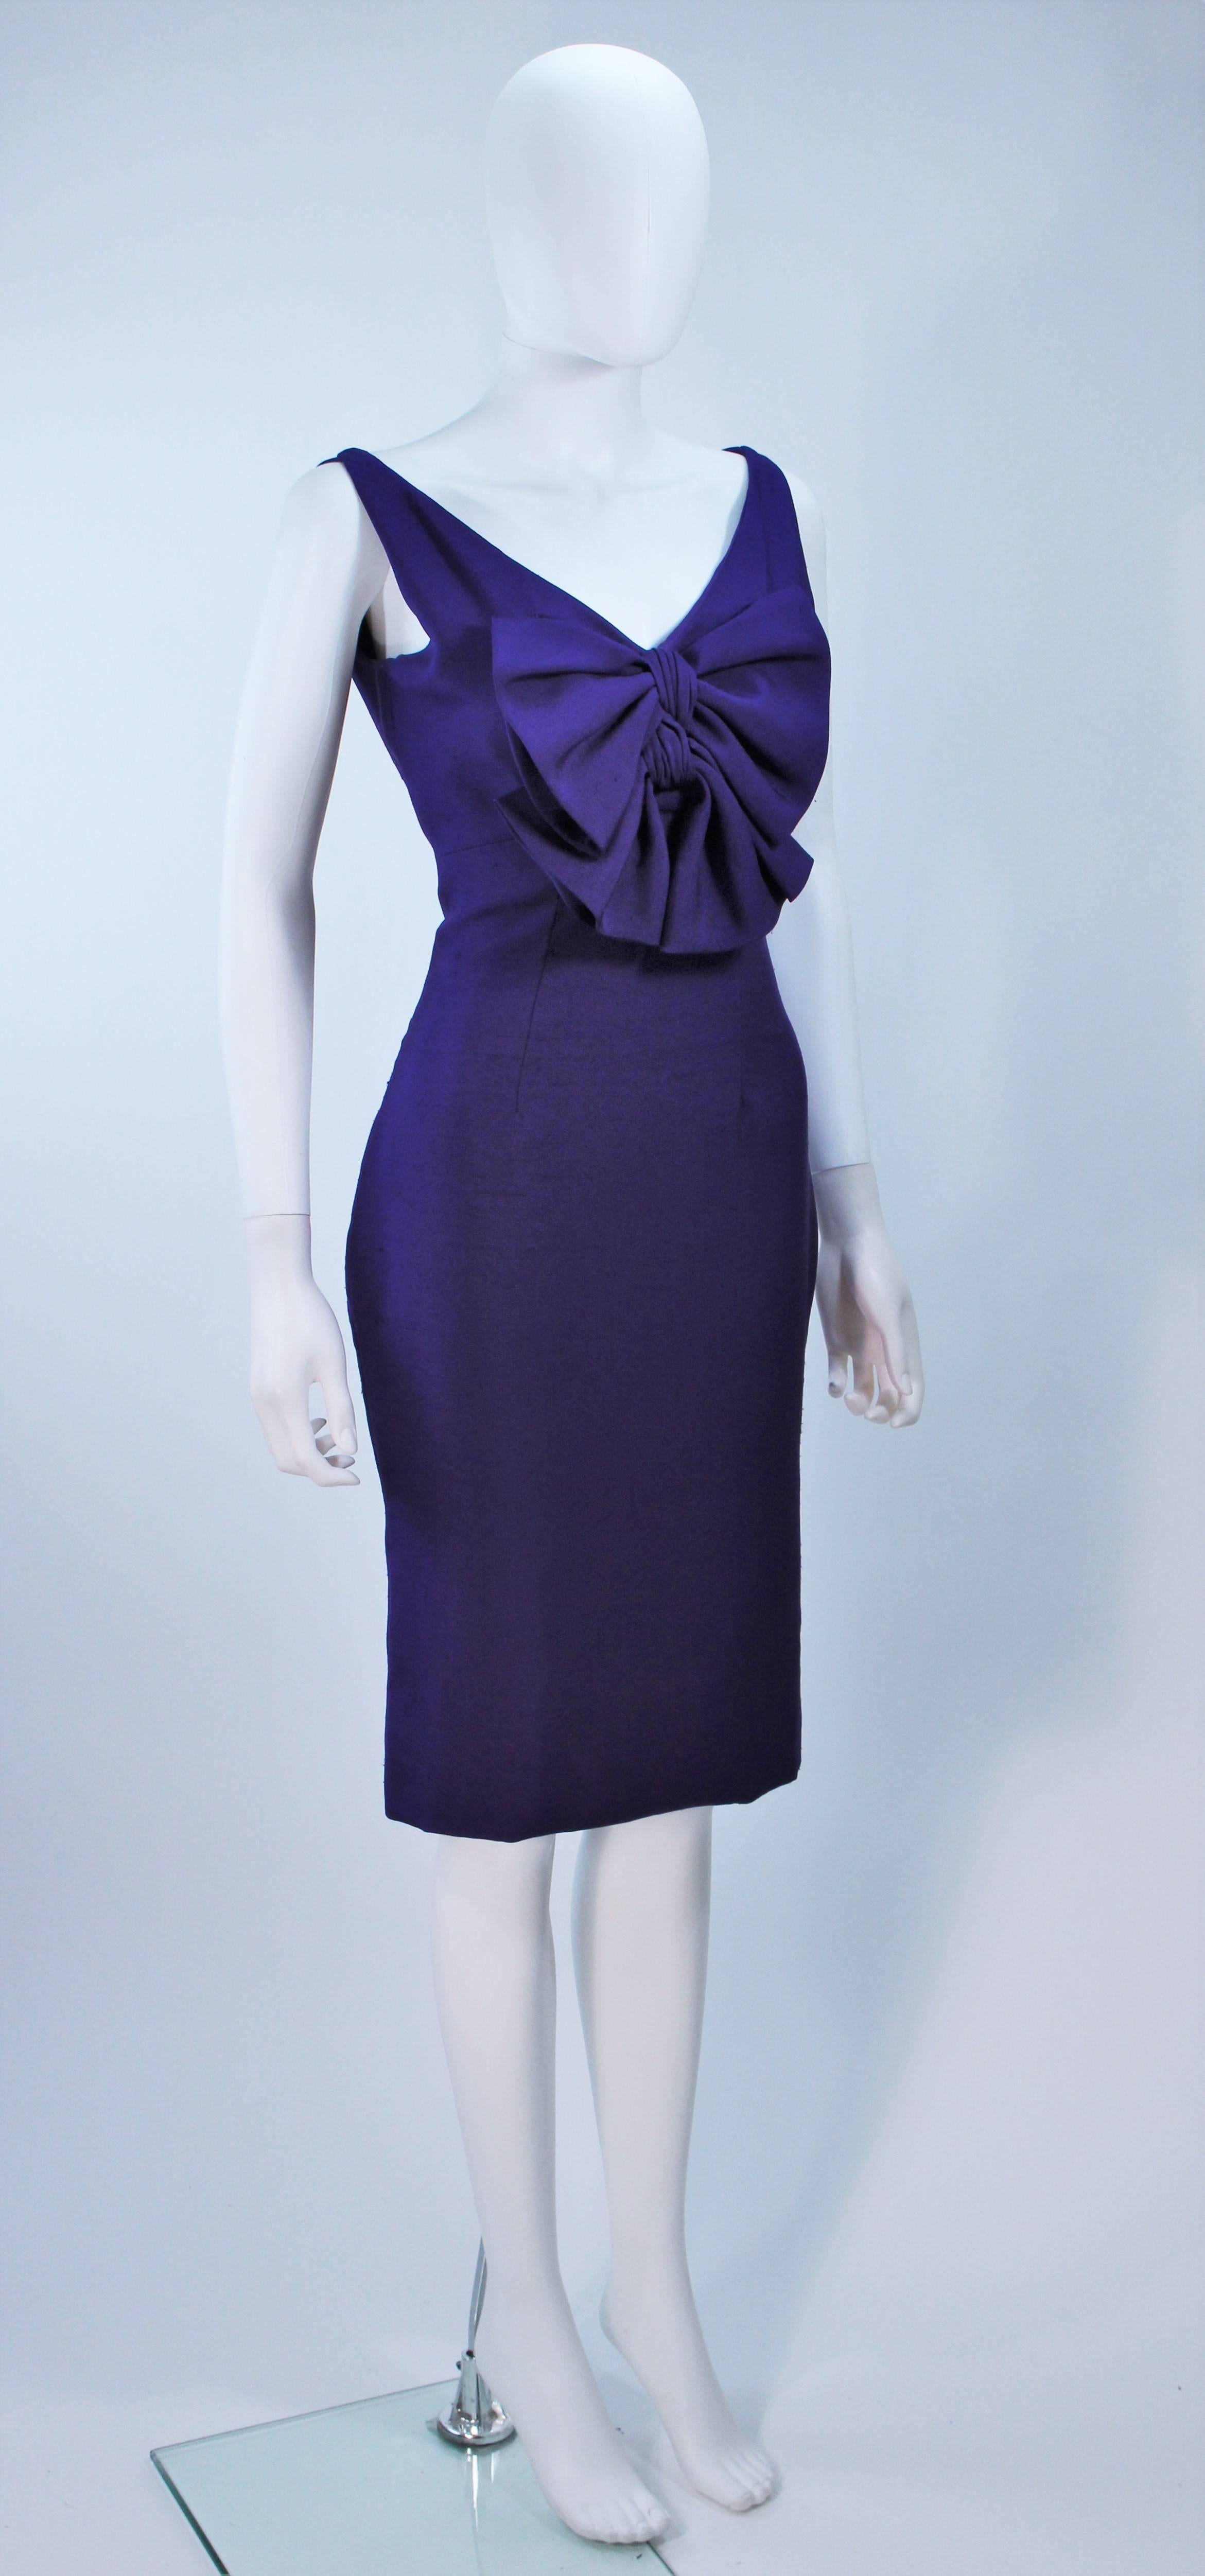 Women's ELIZABETH MASON COUTURE Purple Silk Cocktail Dress with Bow Made to Order For Sale